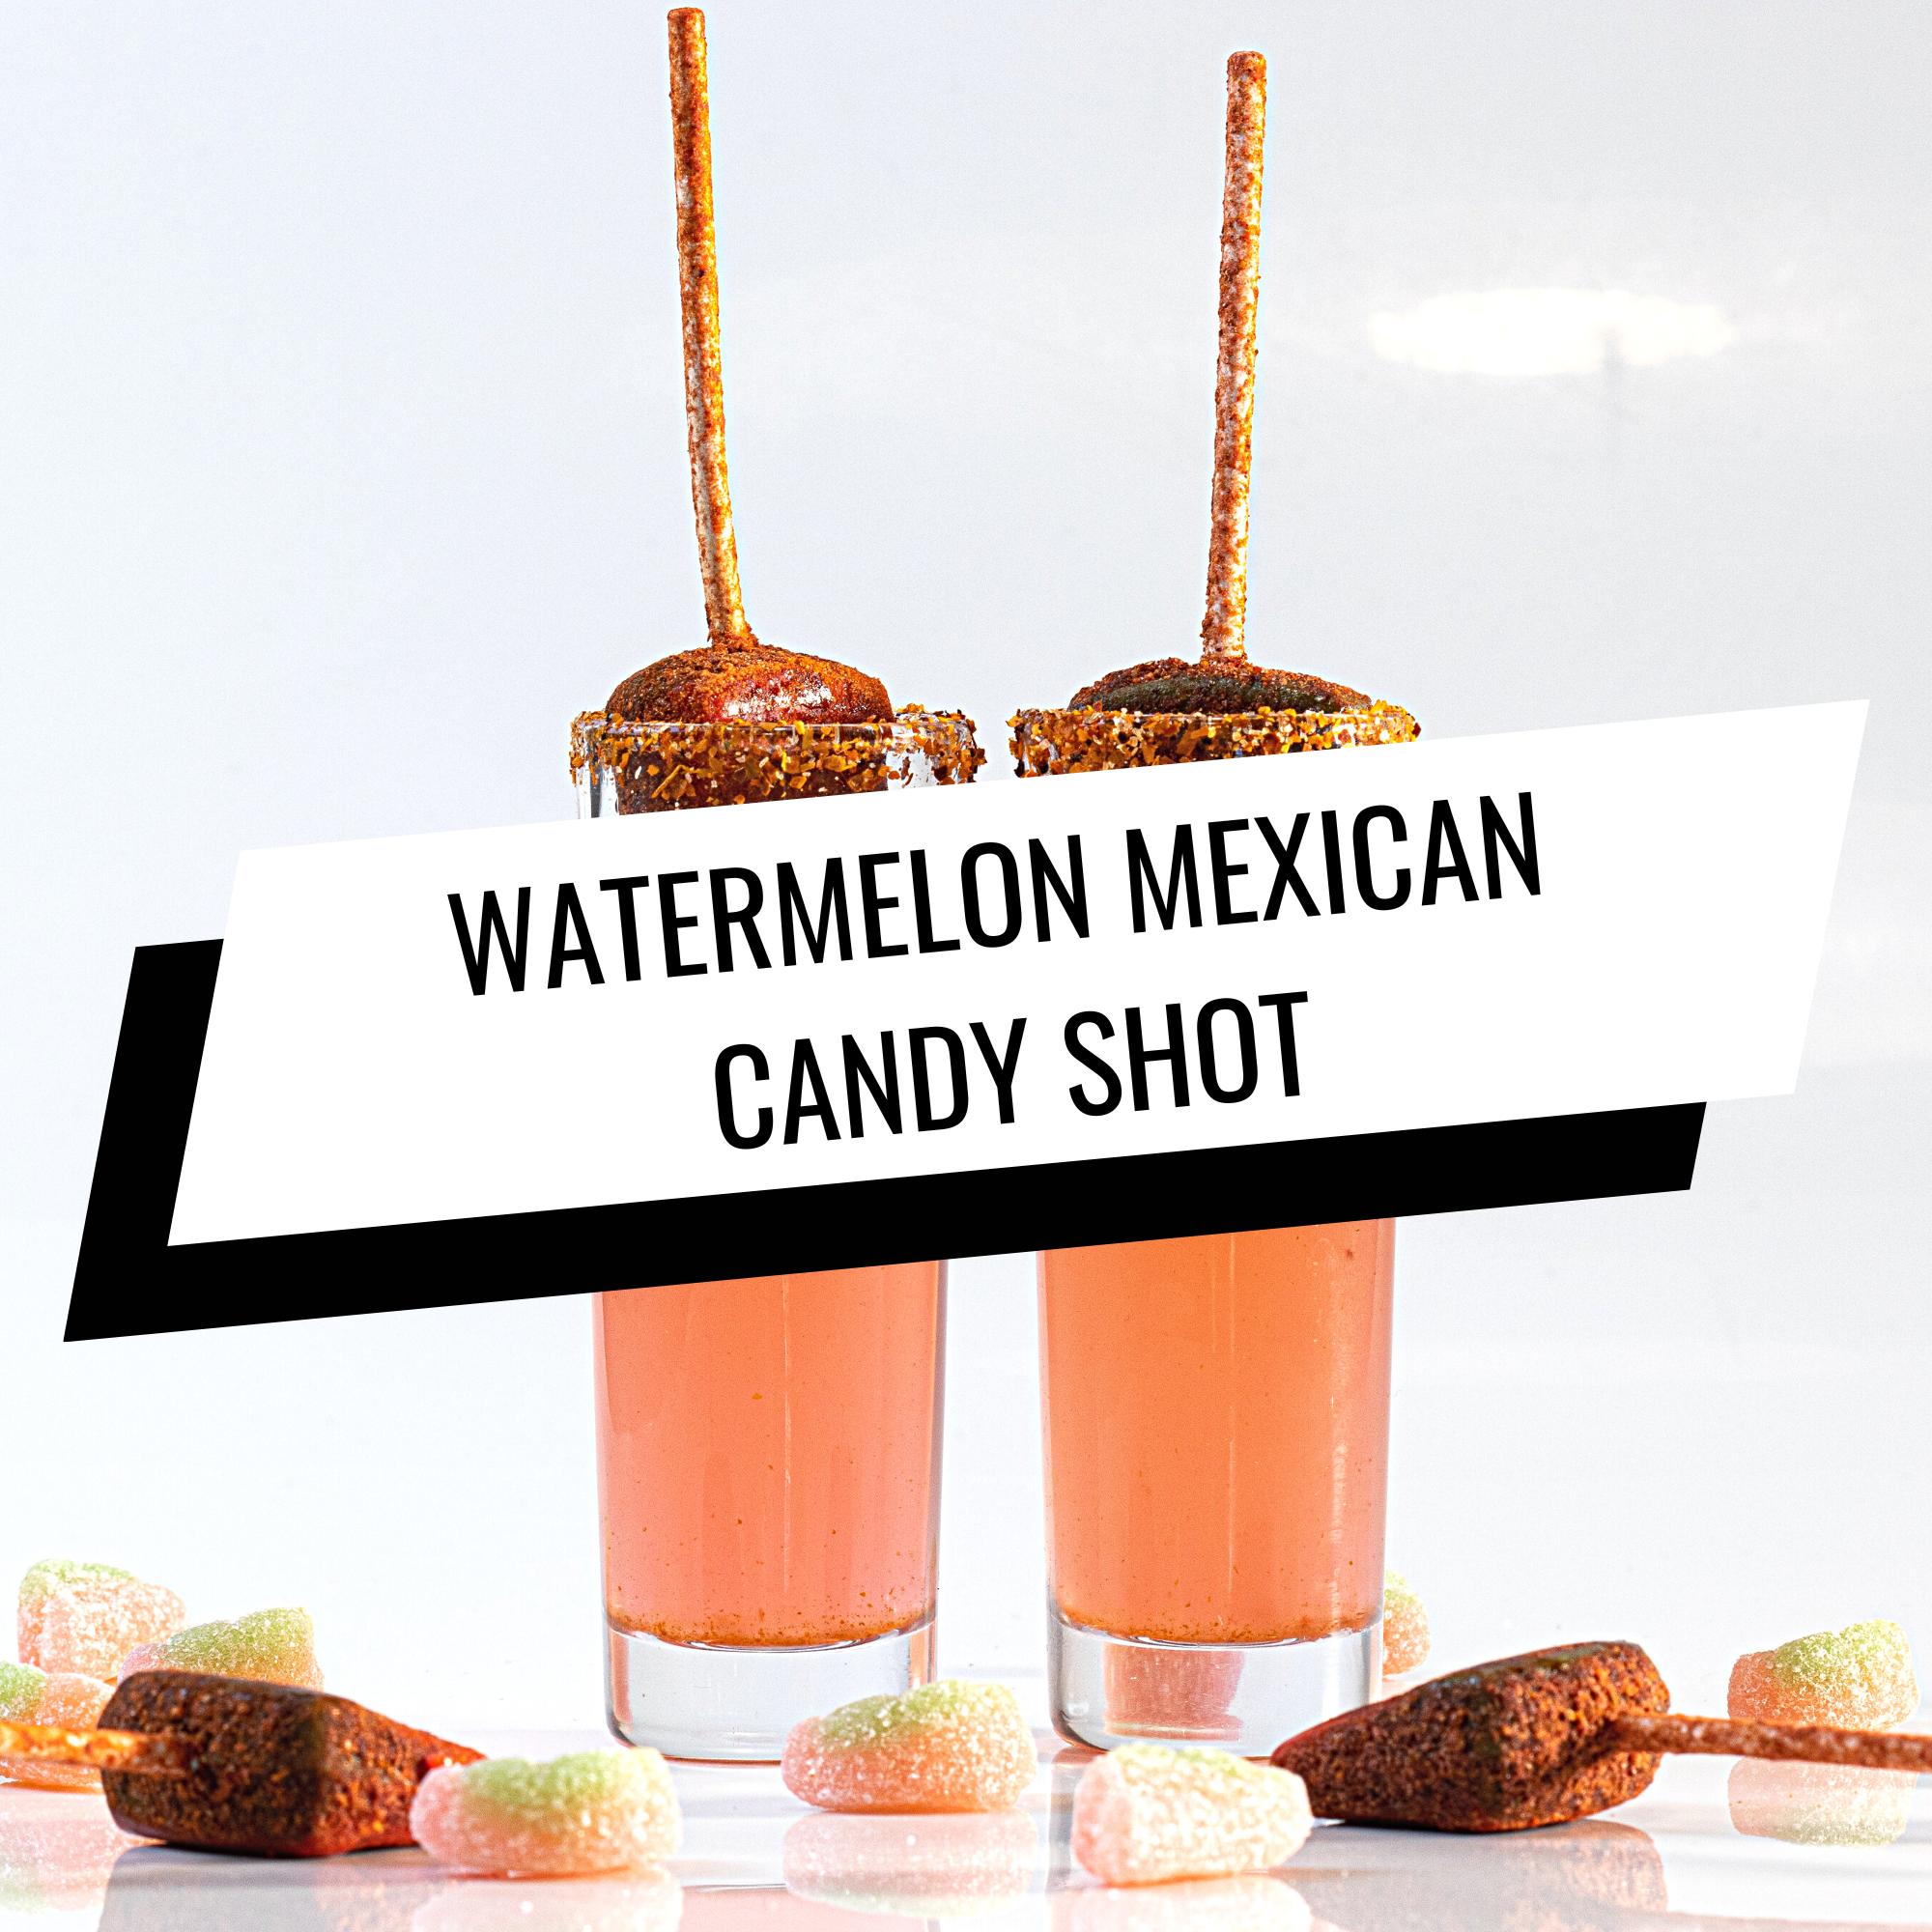 Watermelon Mexican candy shot